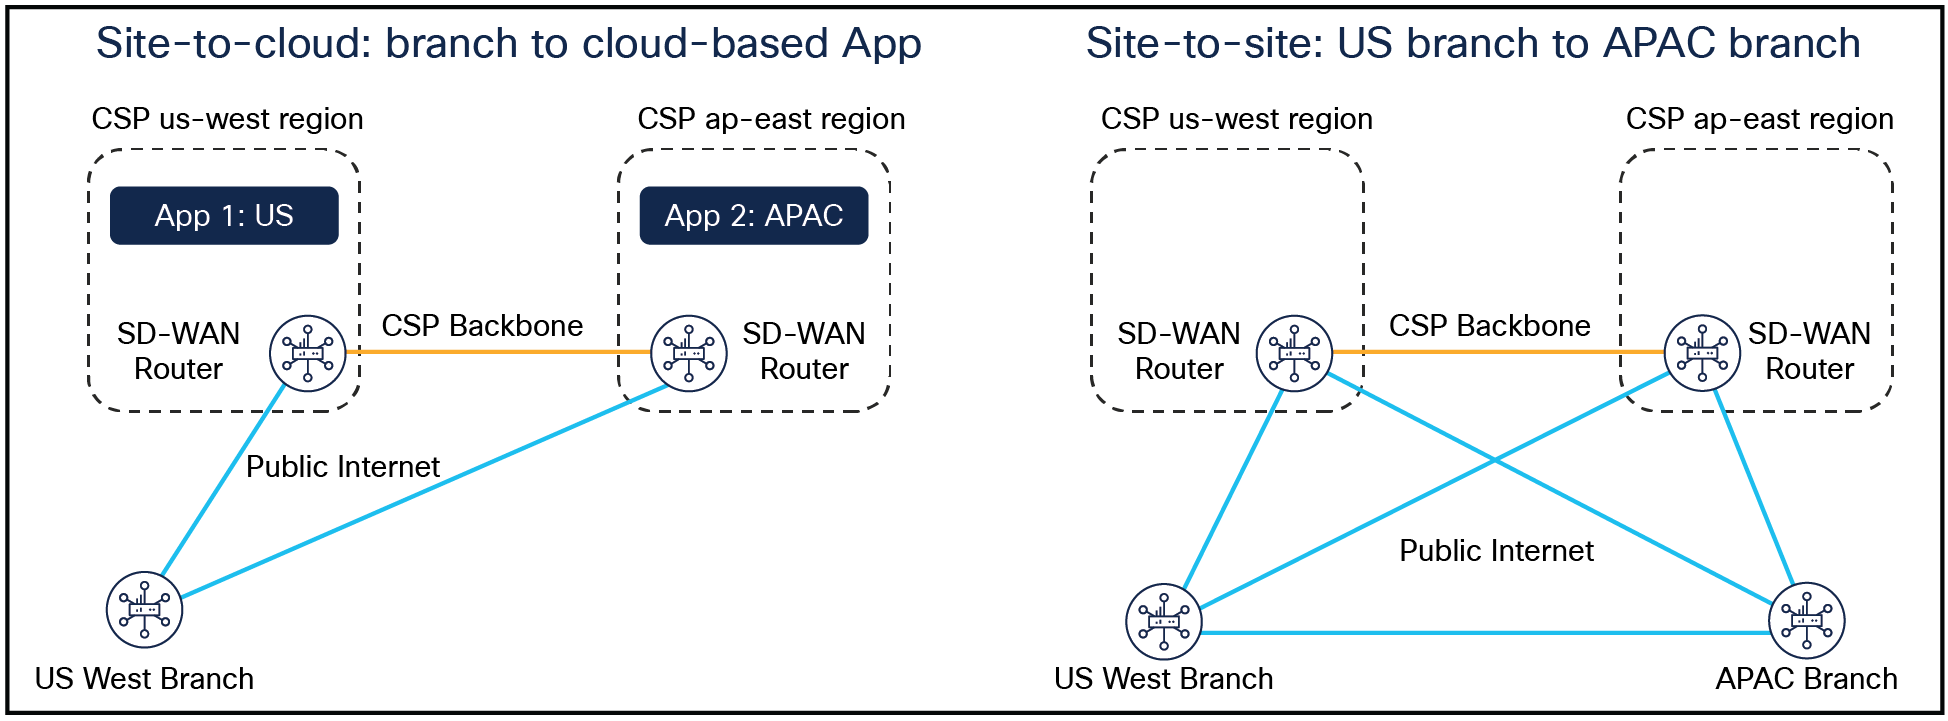 SD-WAN and Google Cloud Use Cases